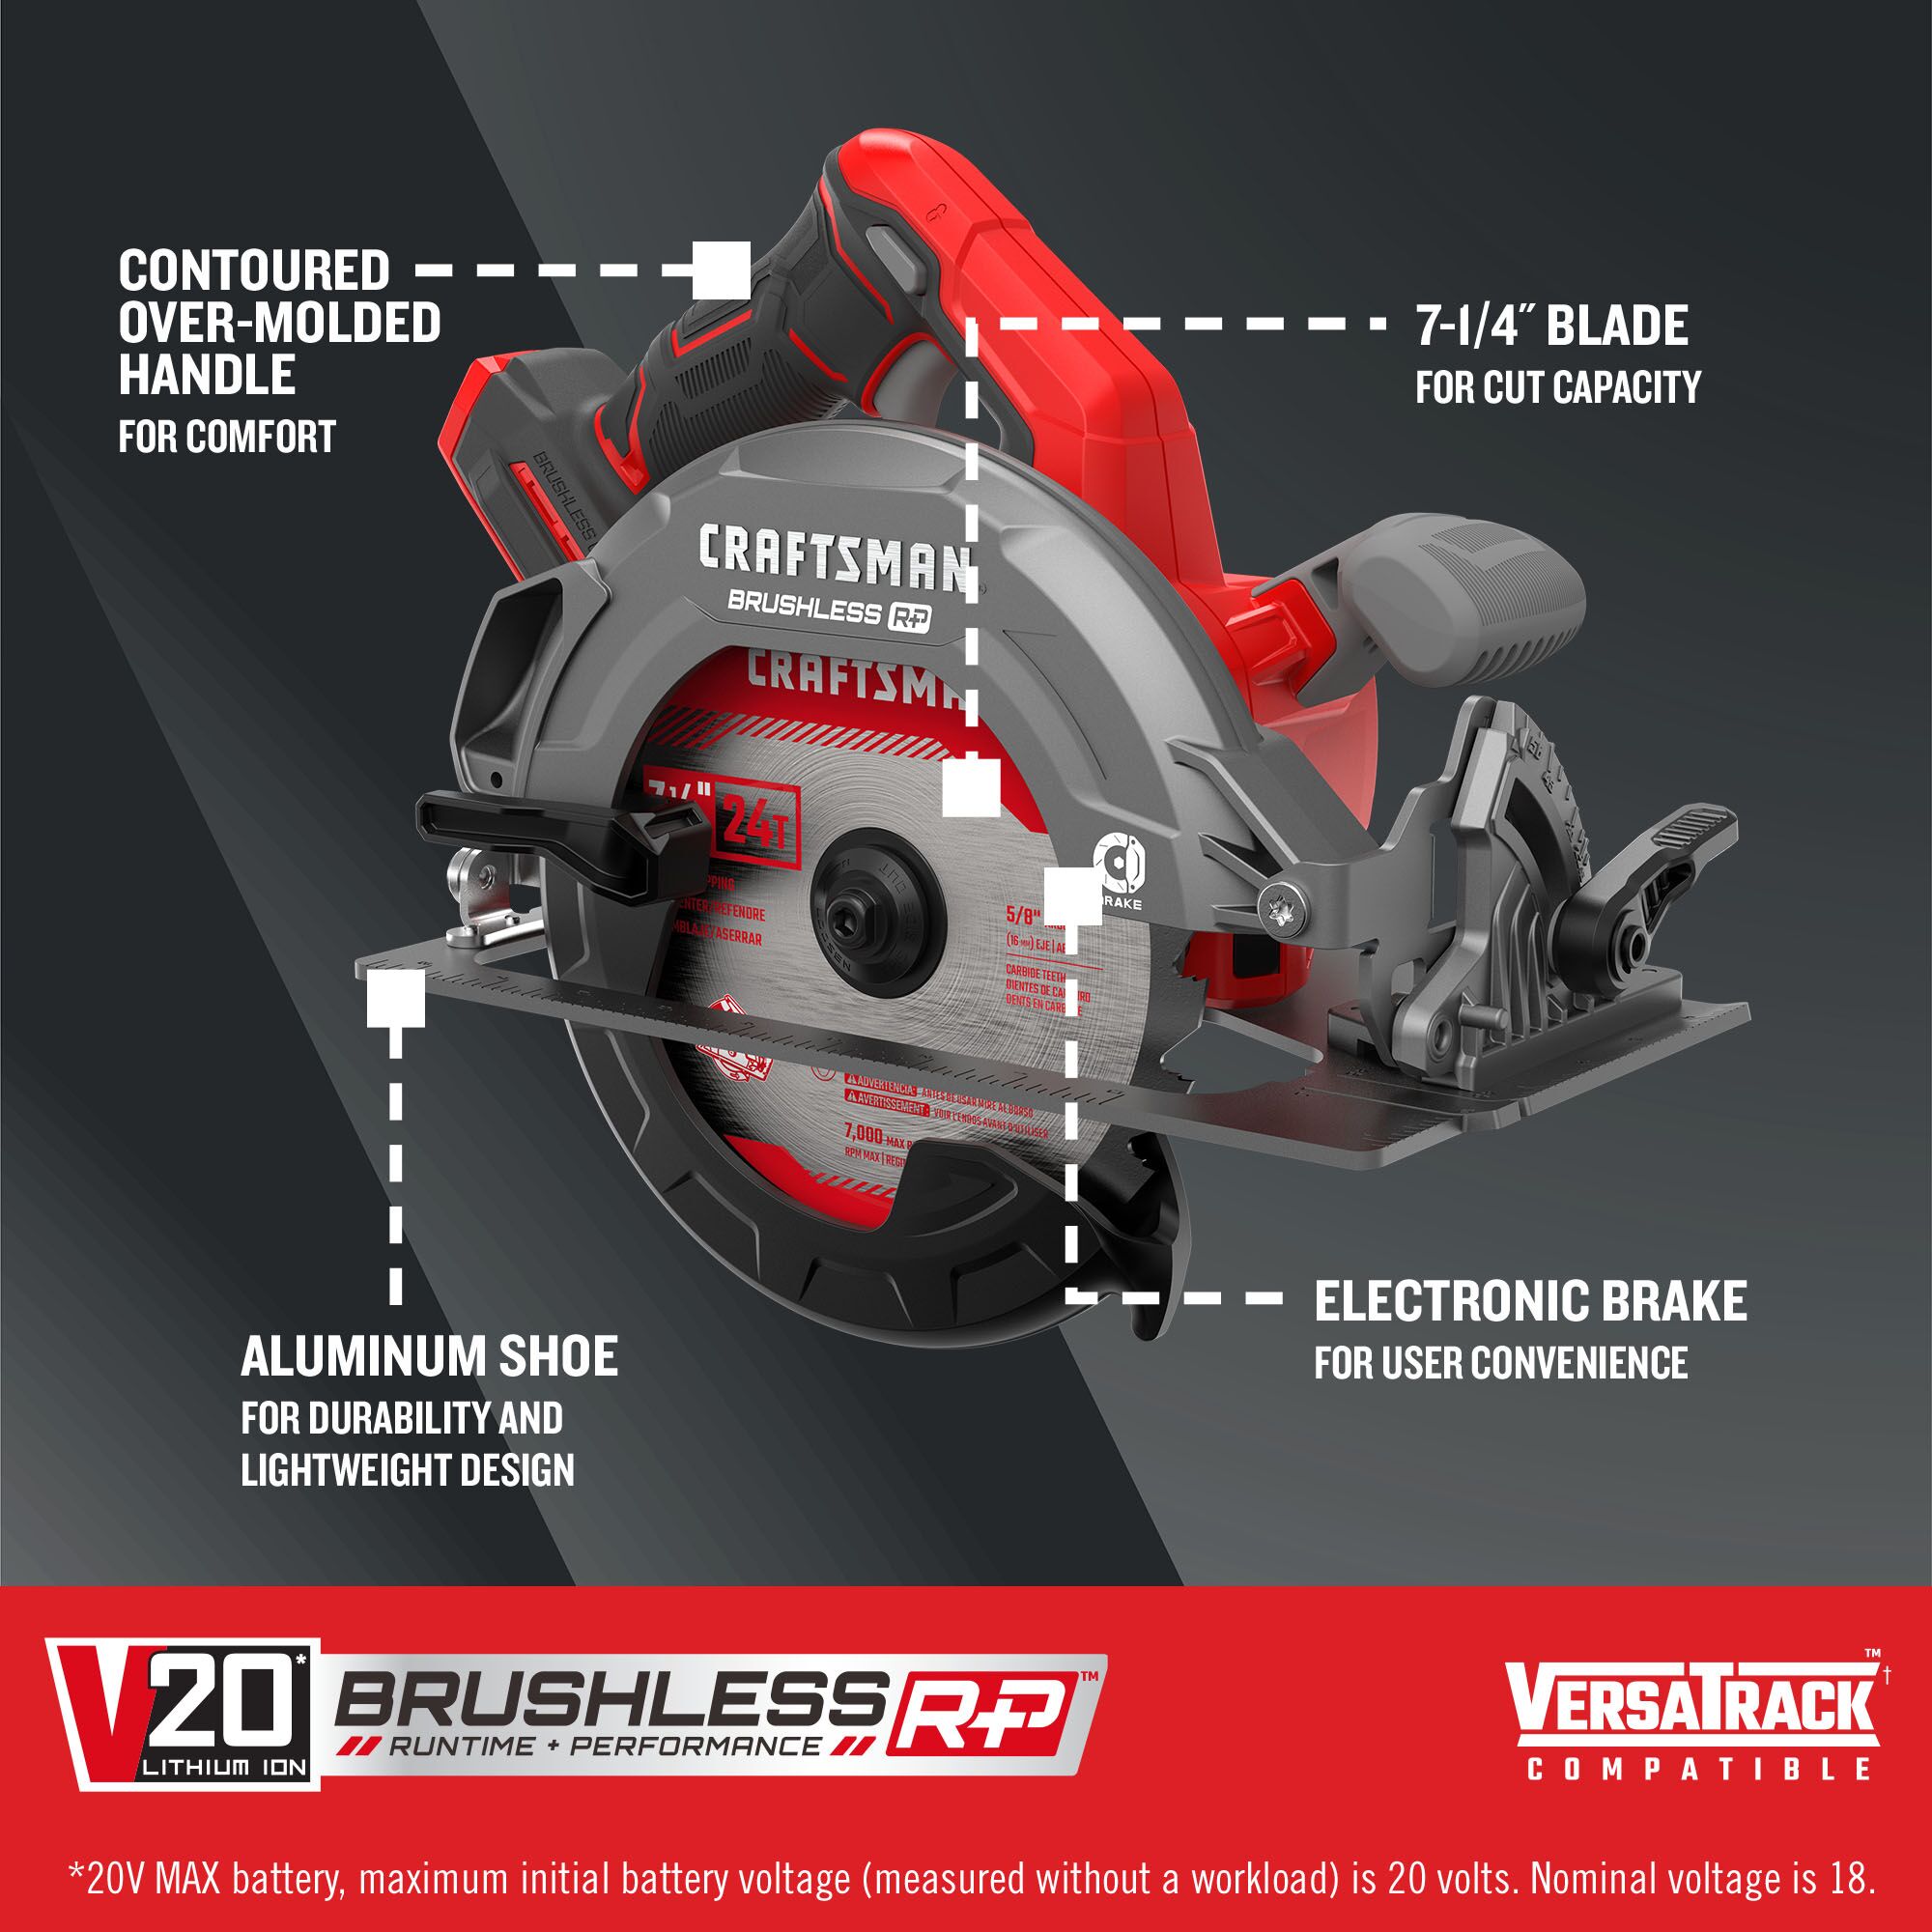 V20 Brushless RP Circular Saw Saw (Tool Only) On dark background